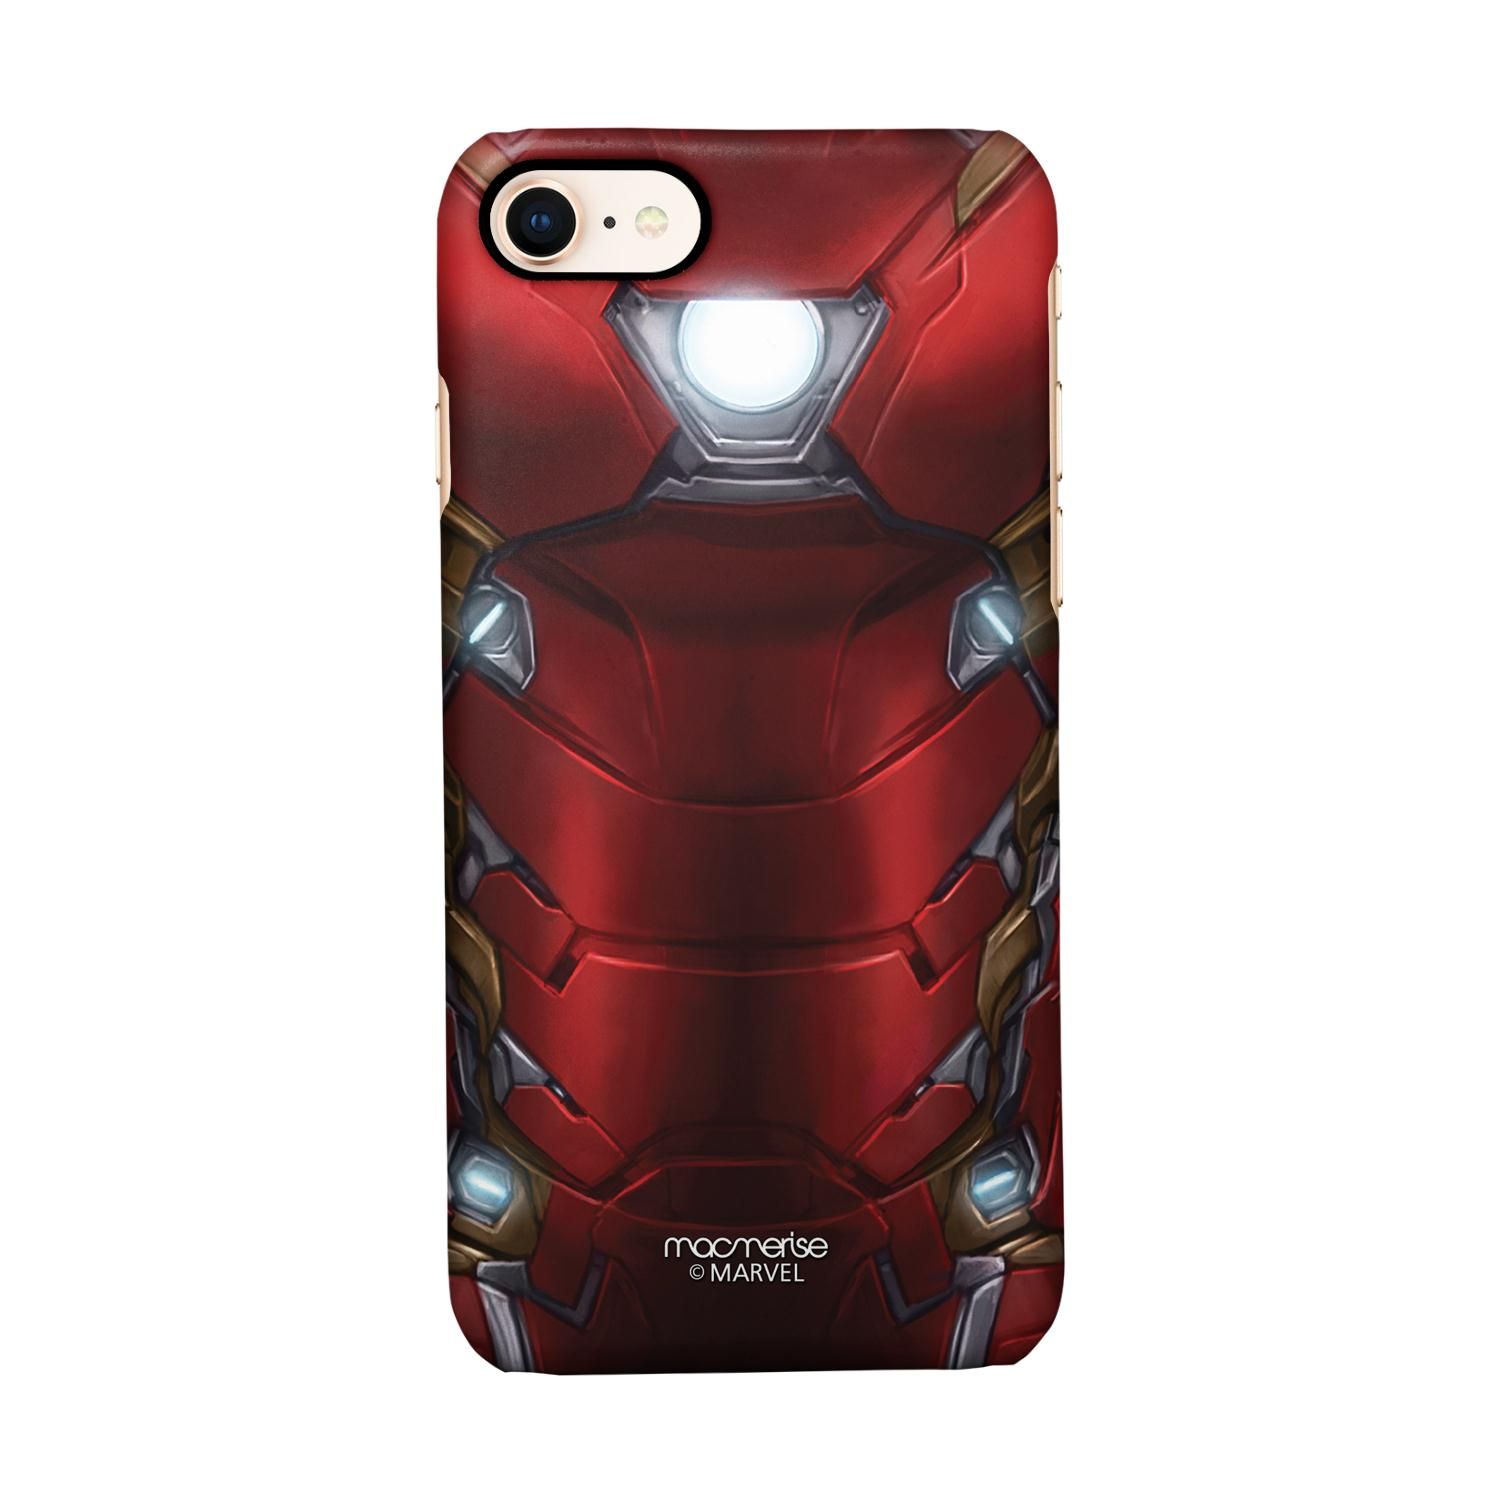 Buy Suit up Ironman - Sleek Phone Case for iPhone 7 Online